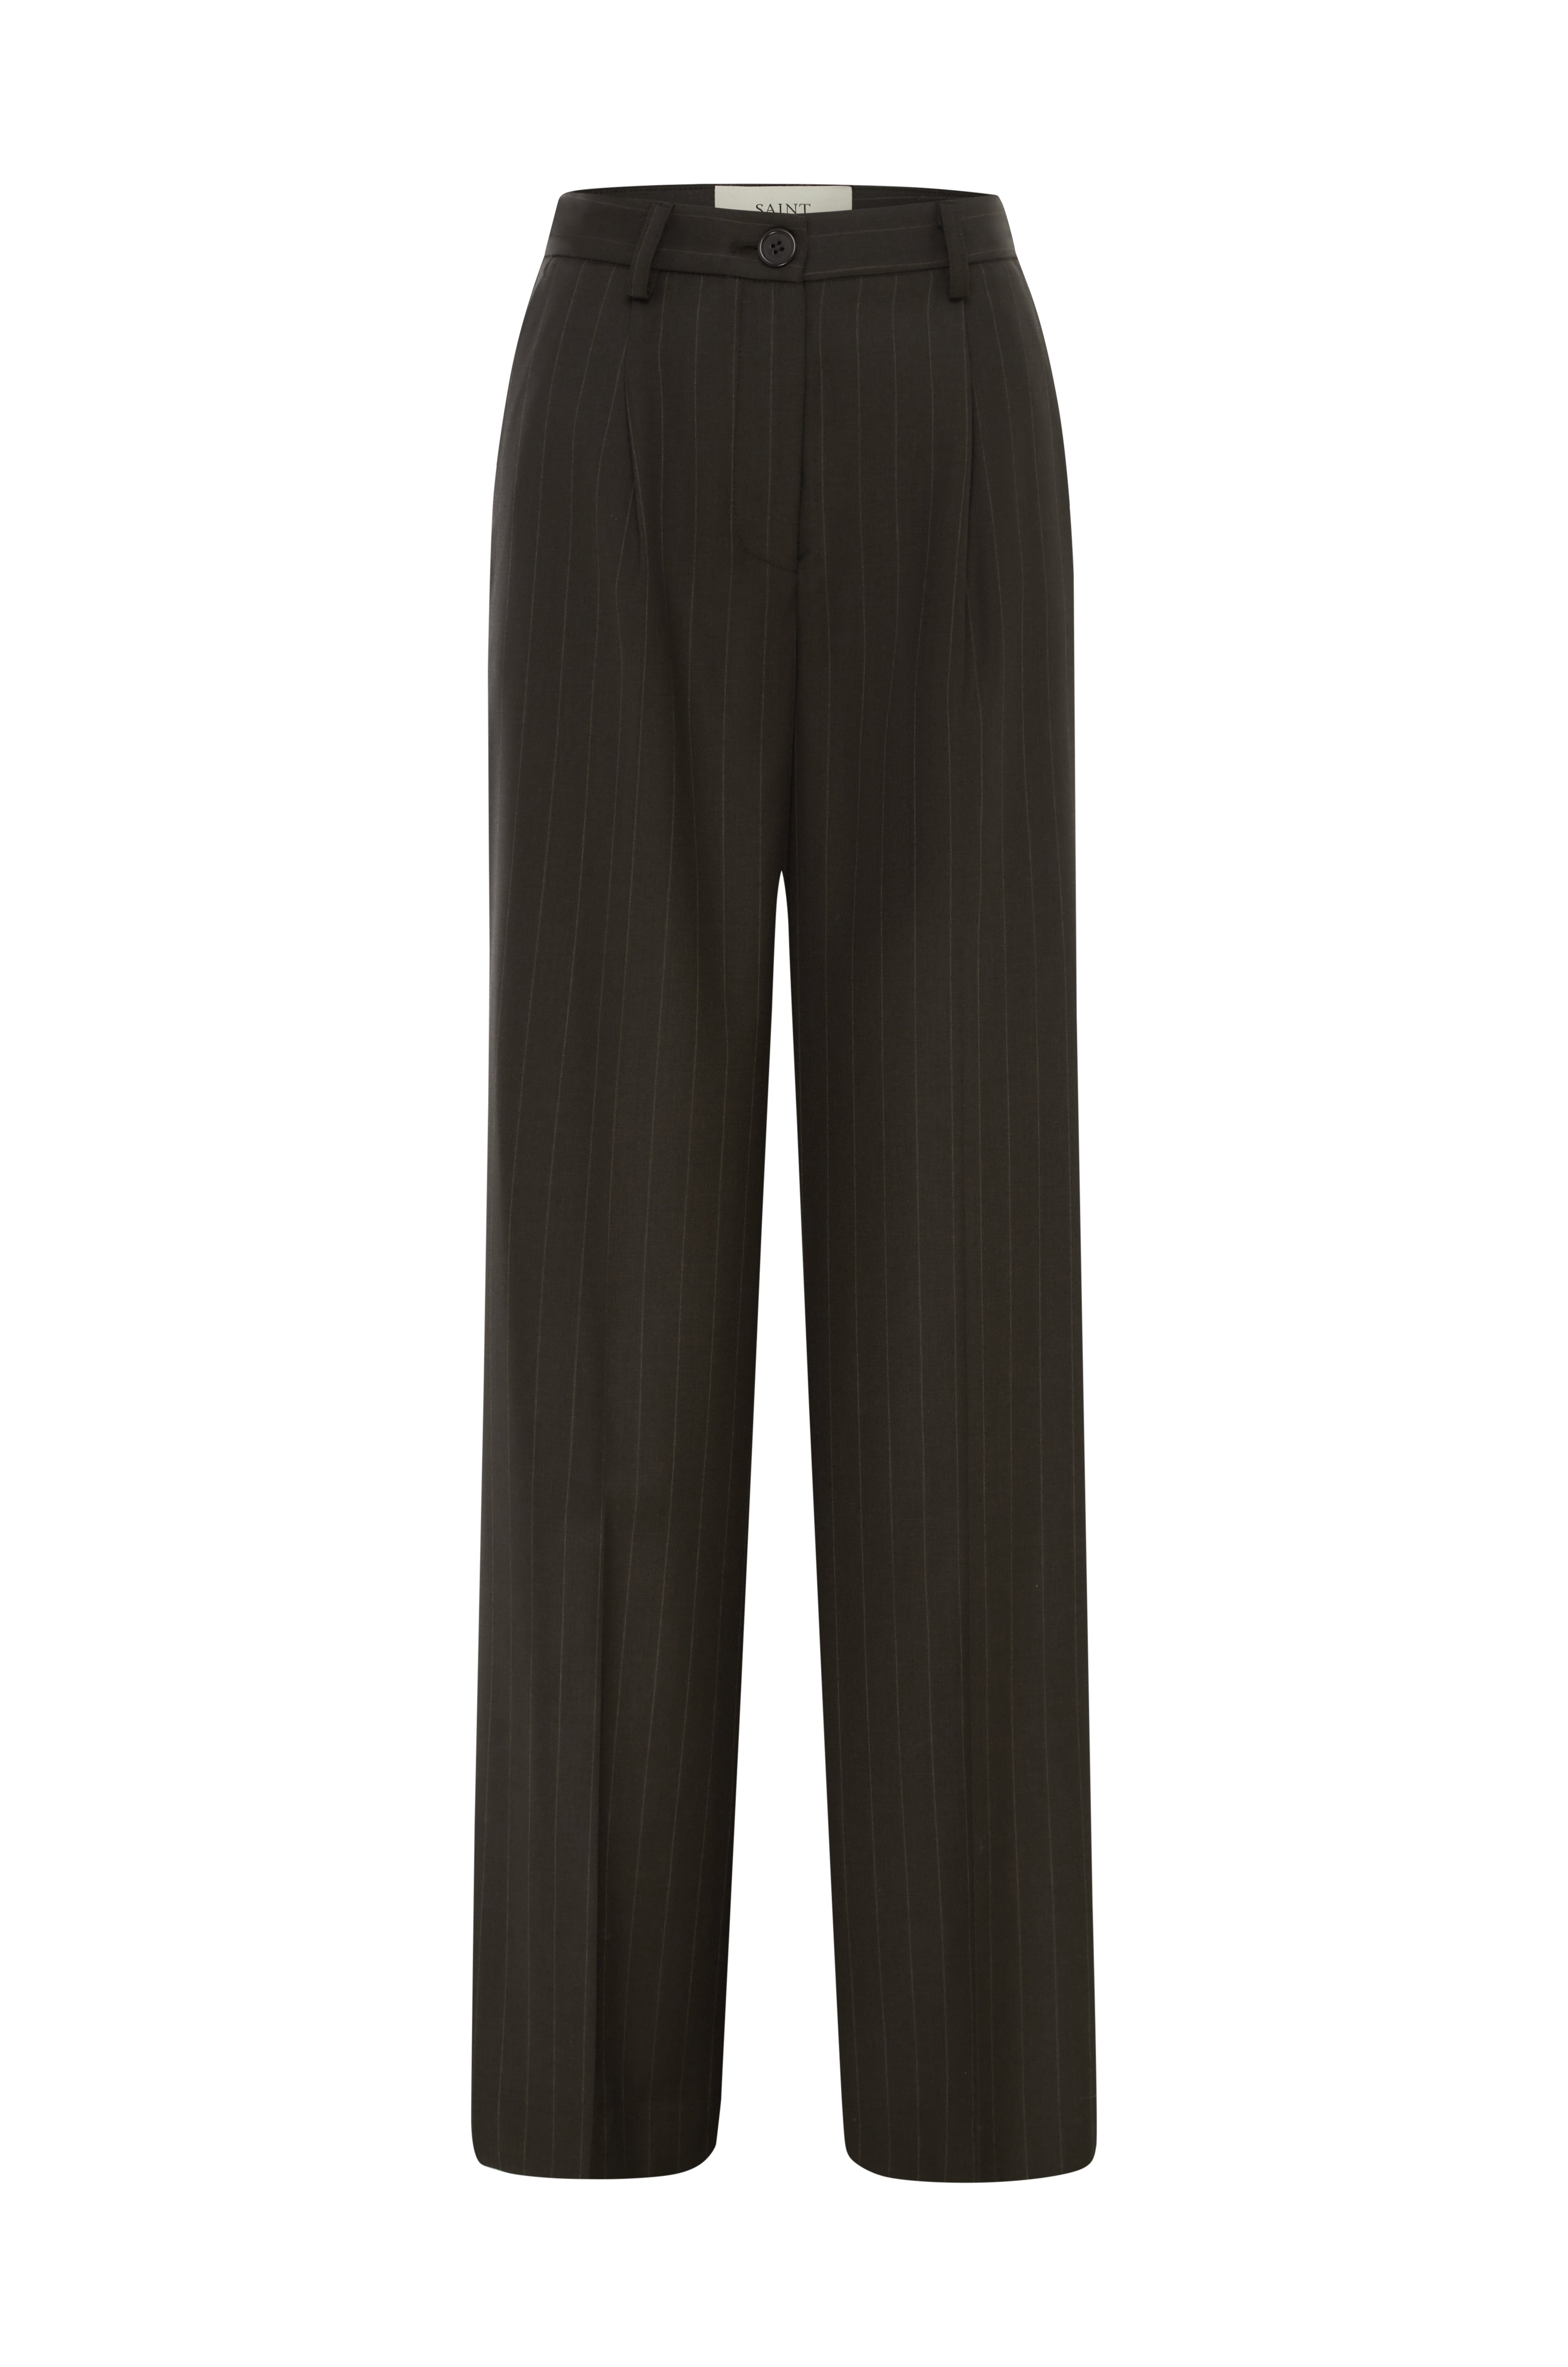 SAINT Tailored Pant Limited Edition Brown Pinstripe